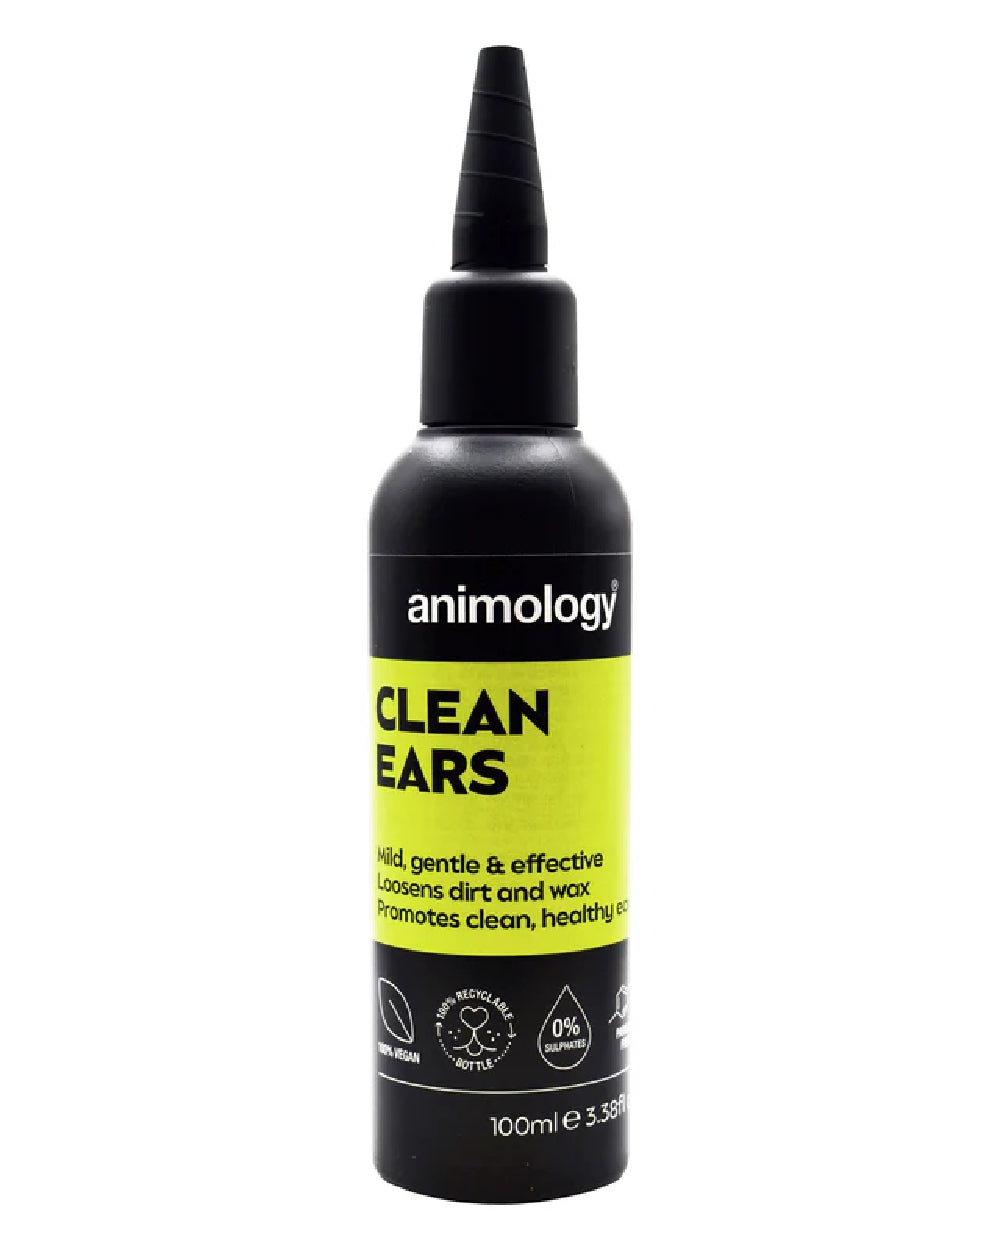 Animology Clean Ears 100ml on white background